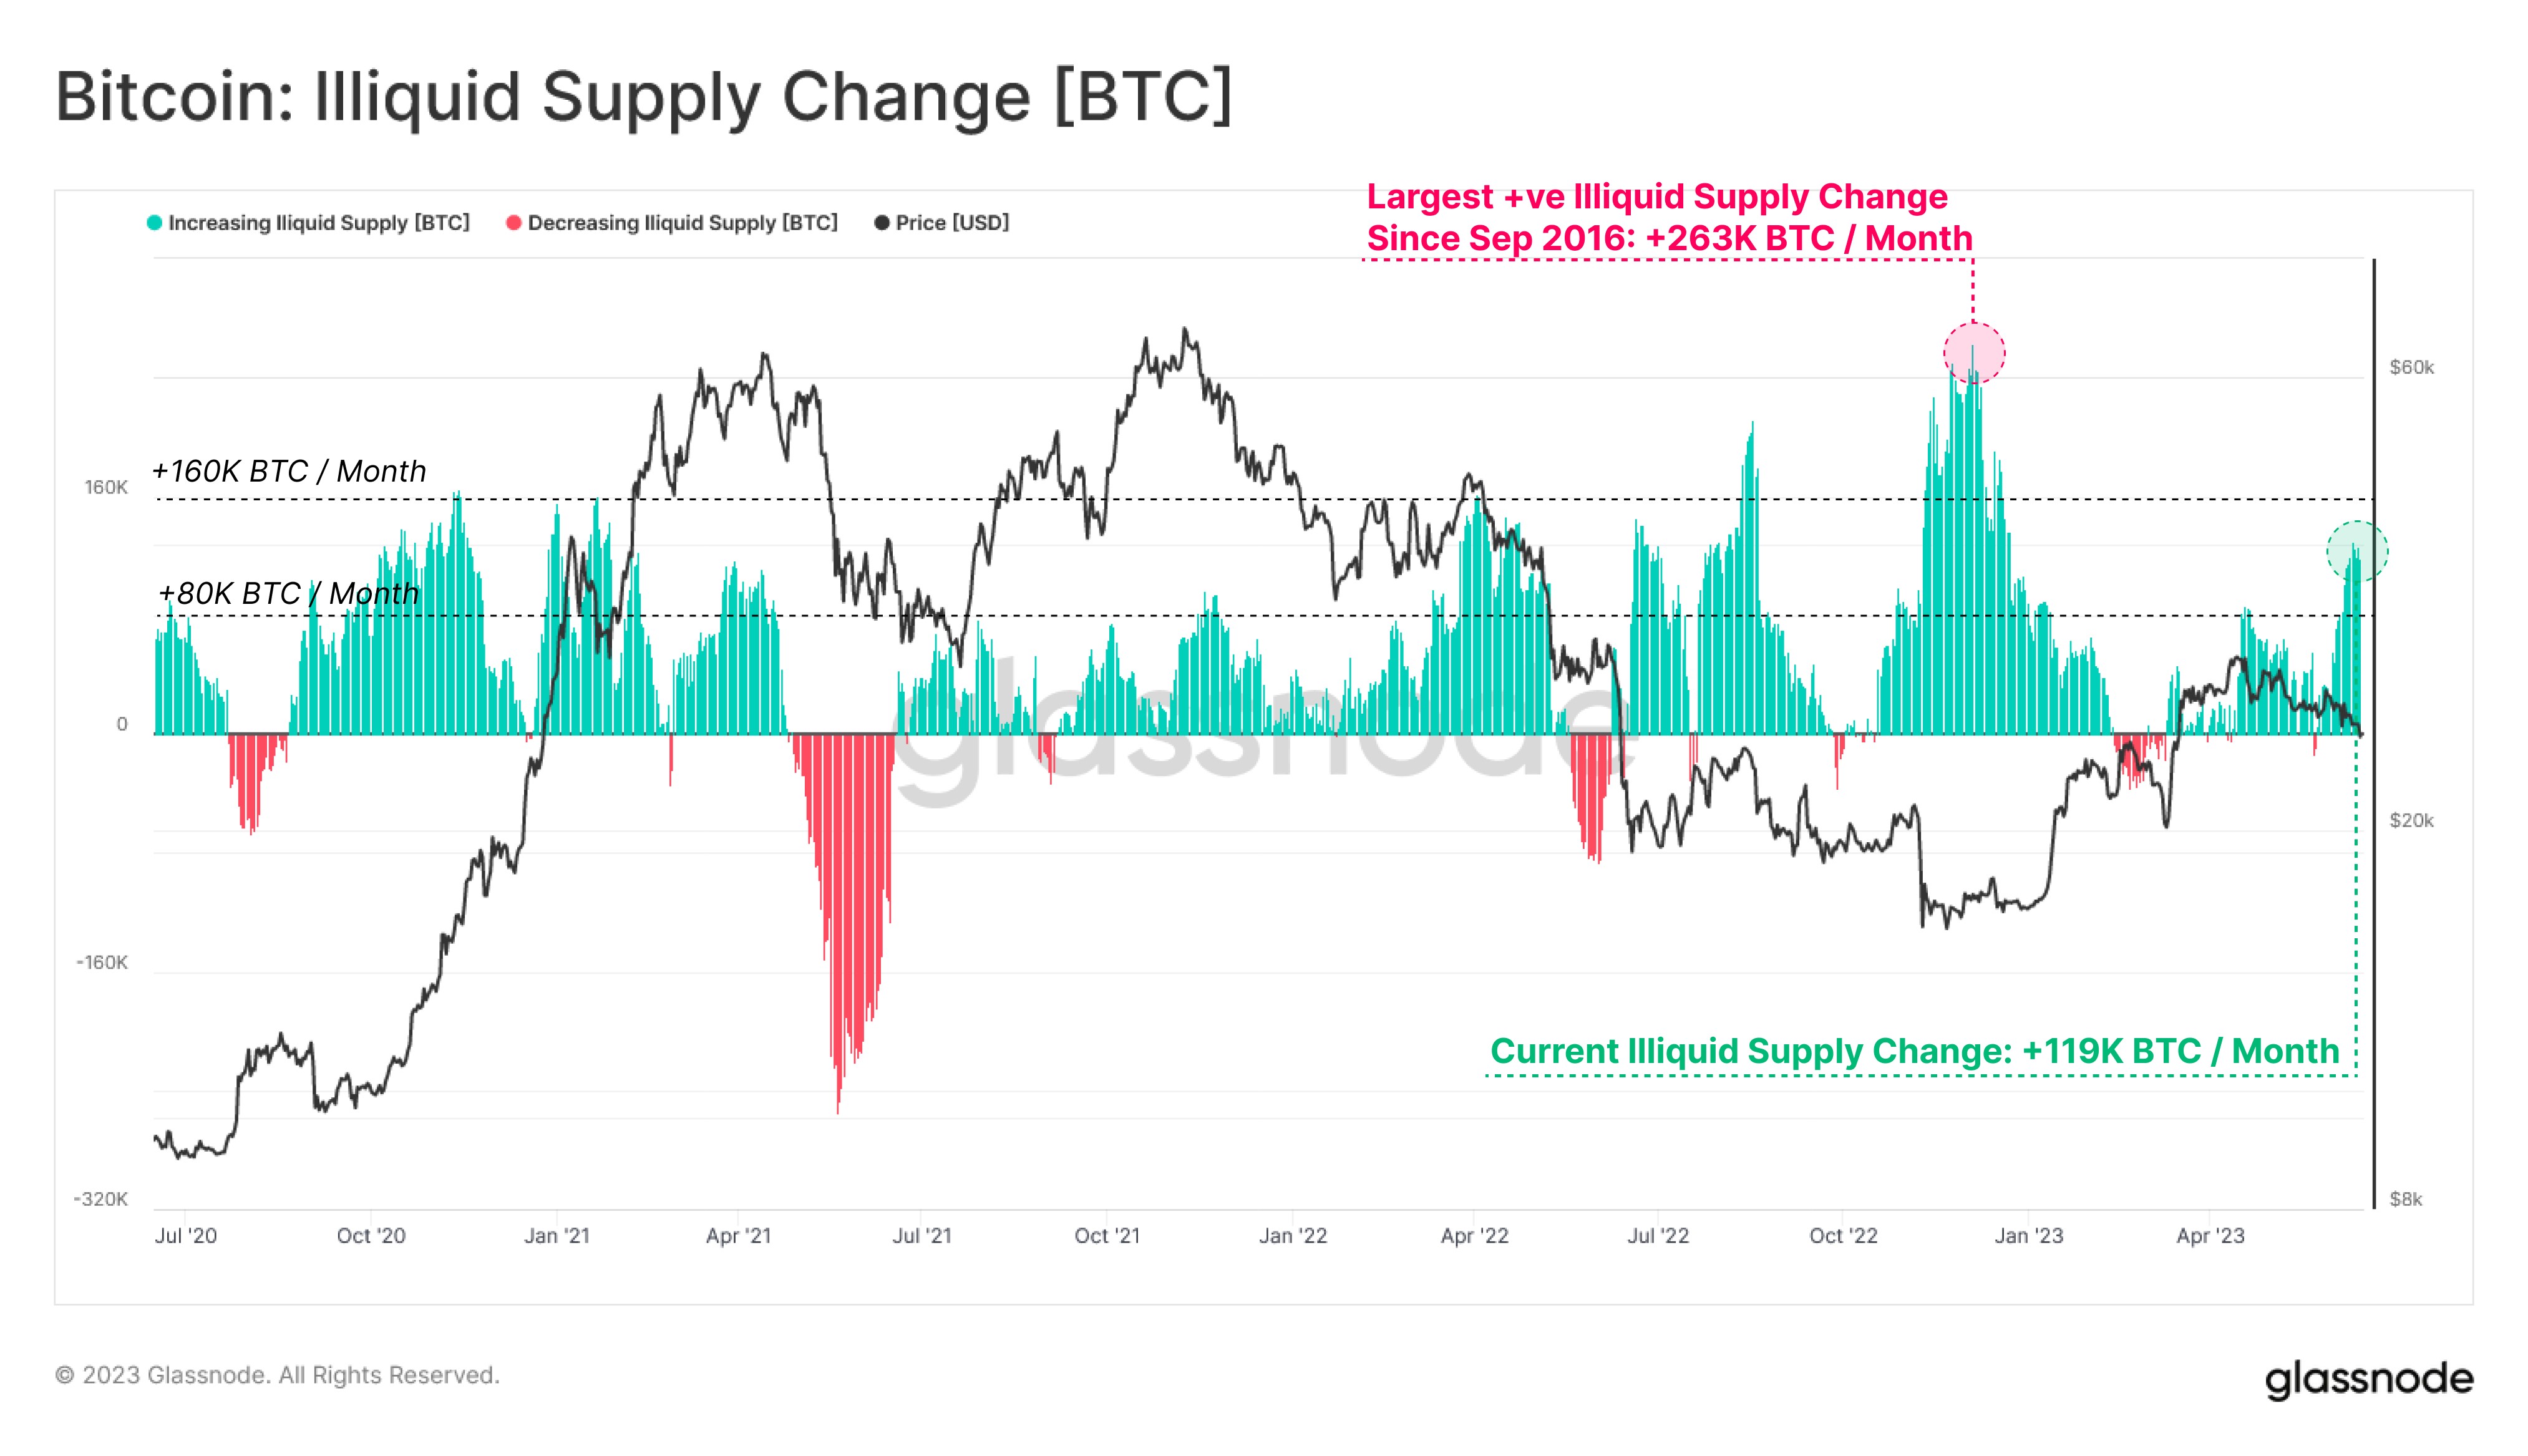 Market research report: Extreme pessimism in crypto gave way to late week bounce even as headwinds prevail - BTC illquid supply change